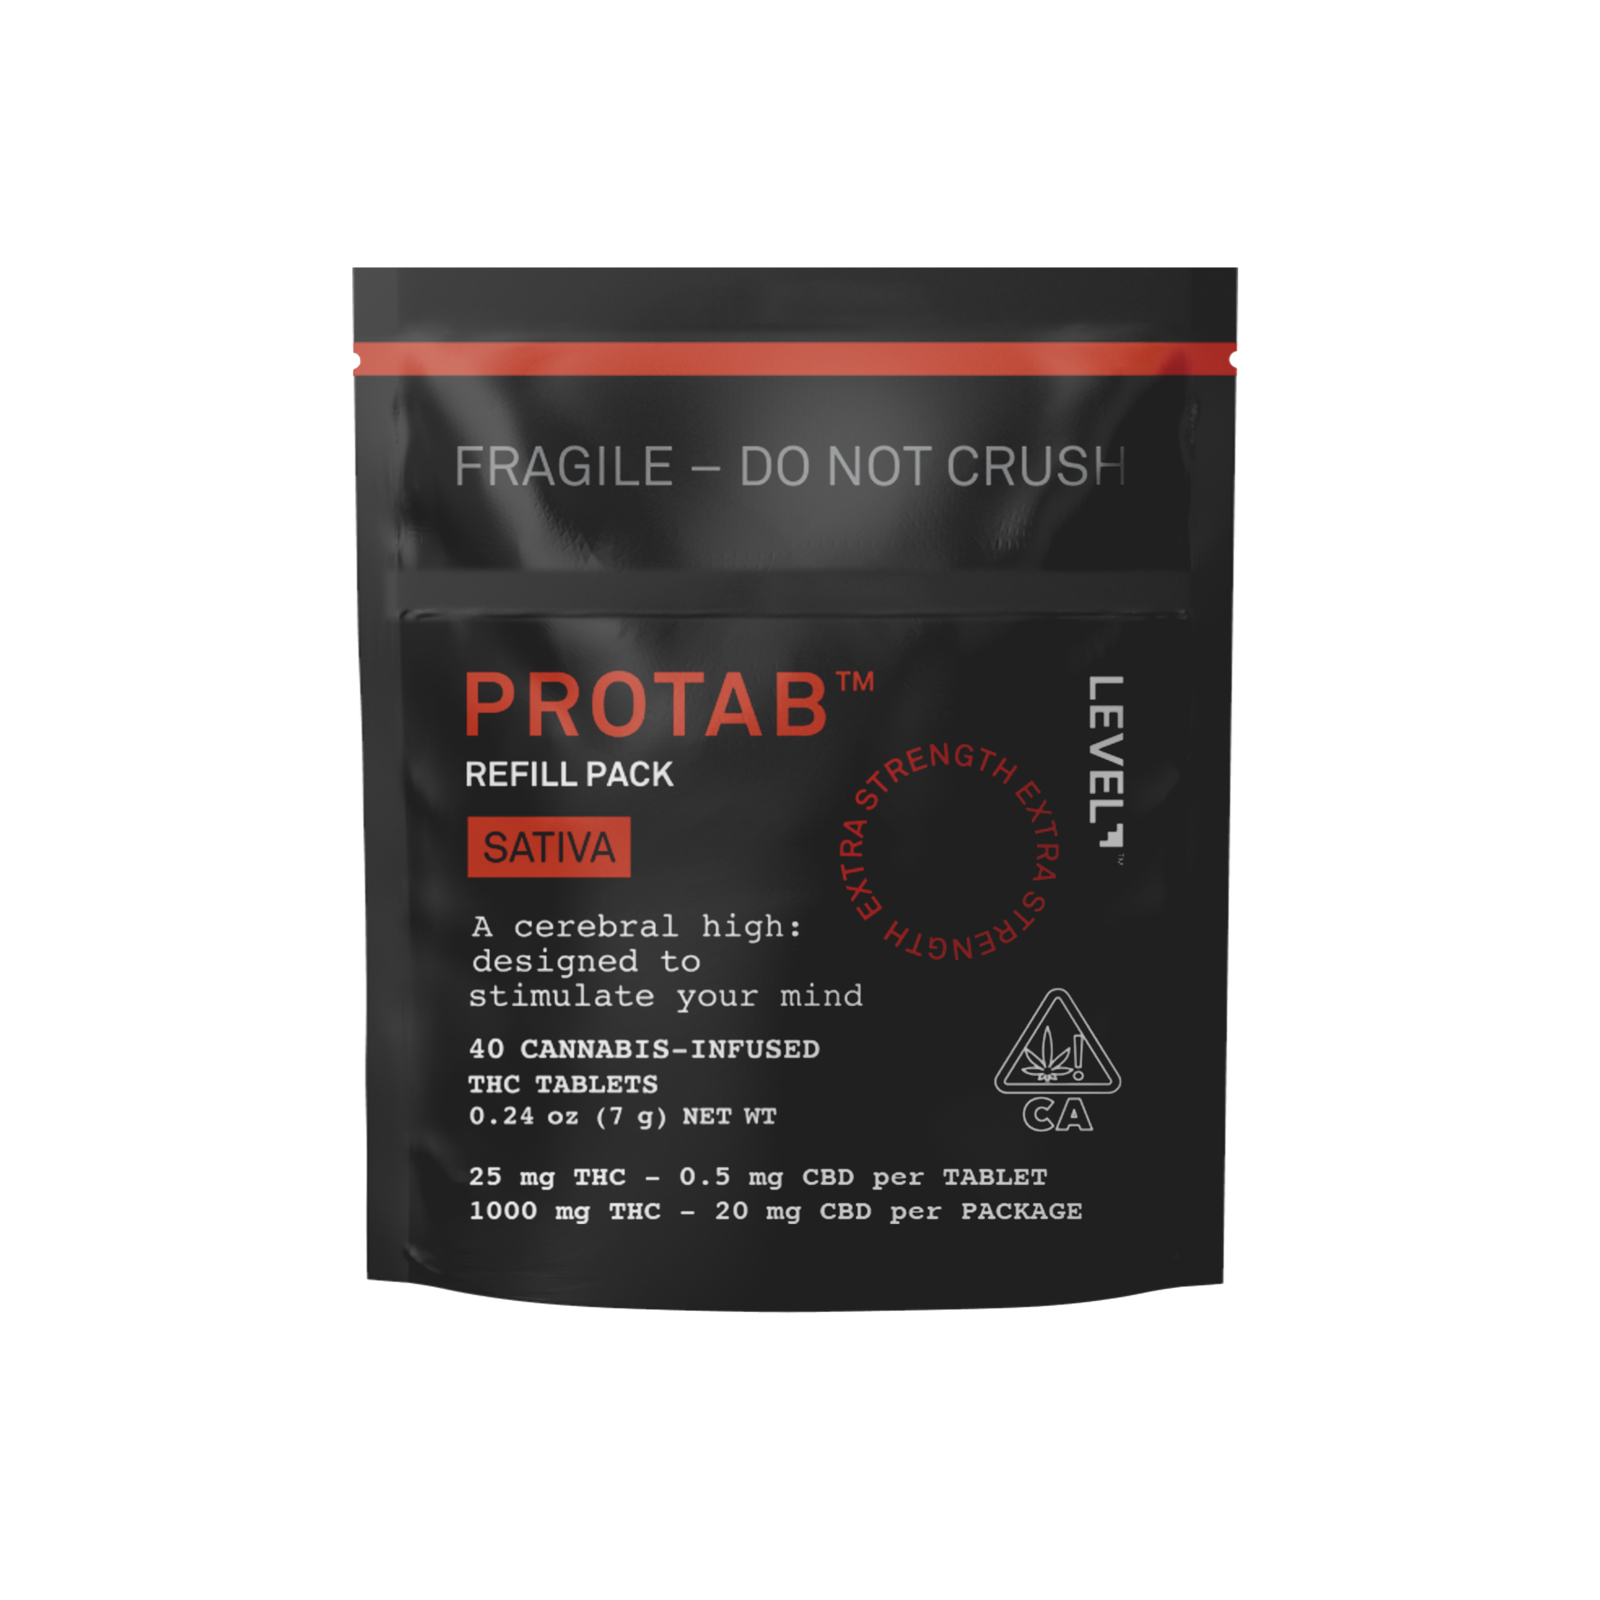 A photograph of Level Protab Refill Pack Sativa